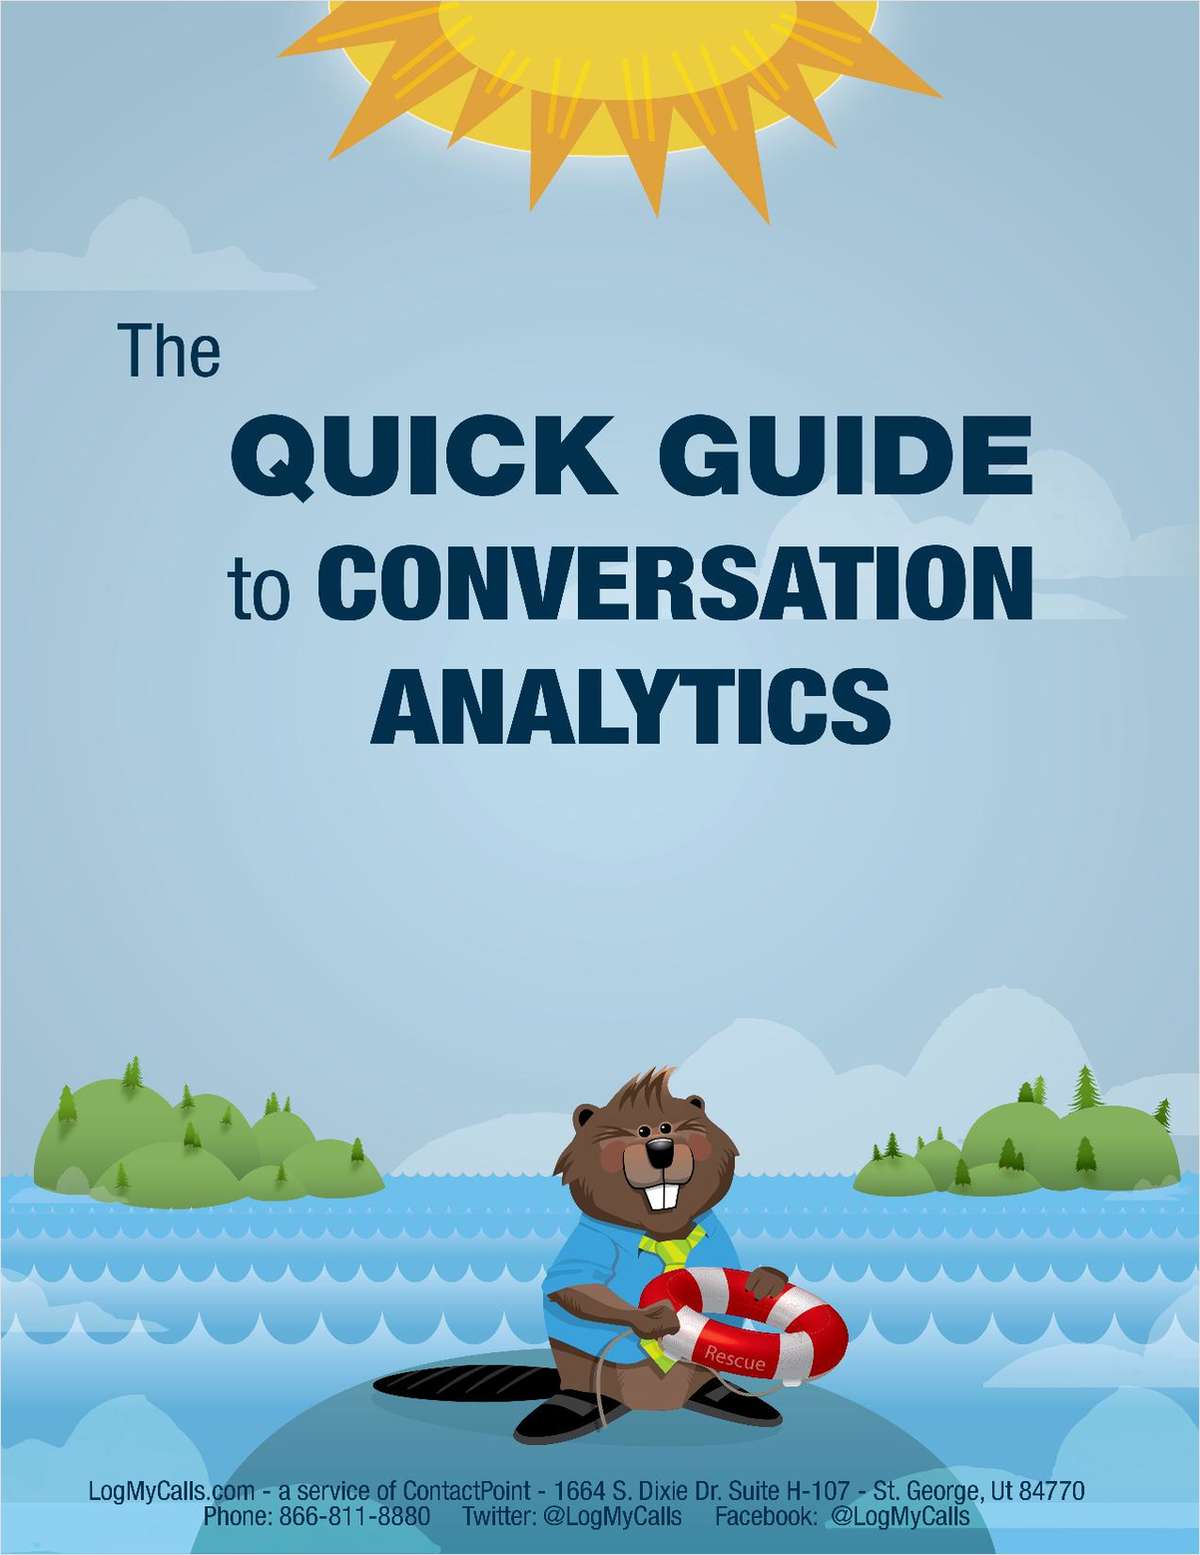 The Quick Guide to Conversation Analytics